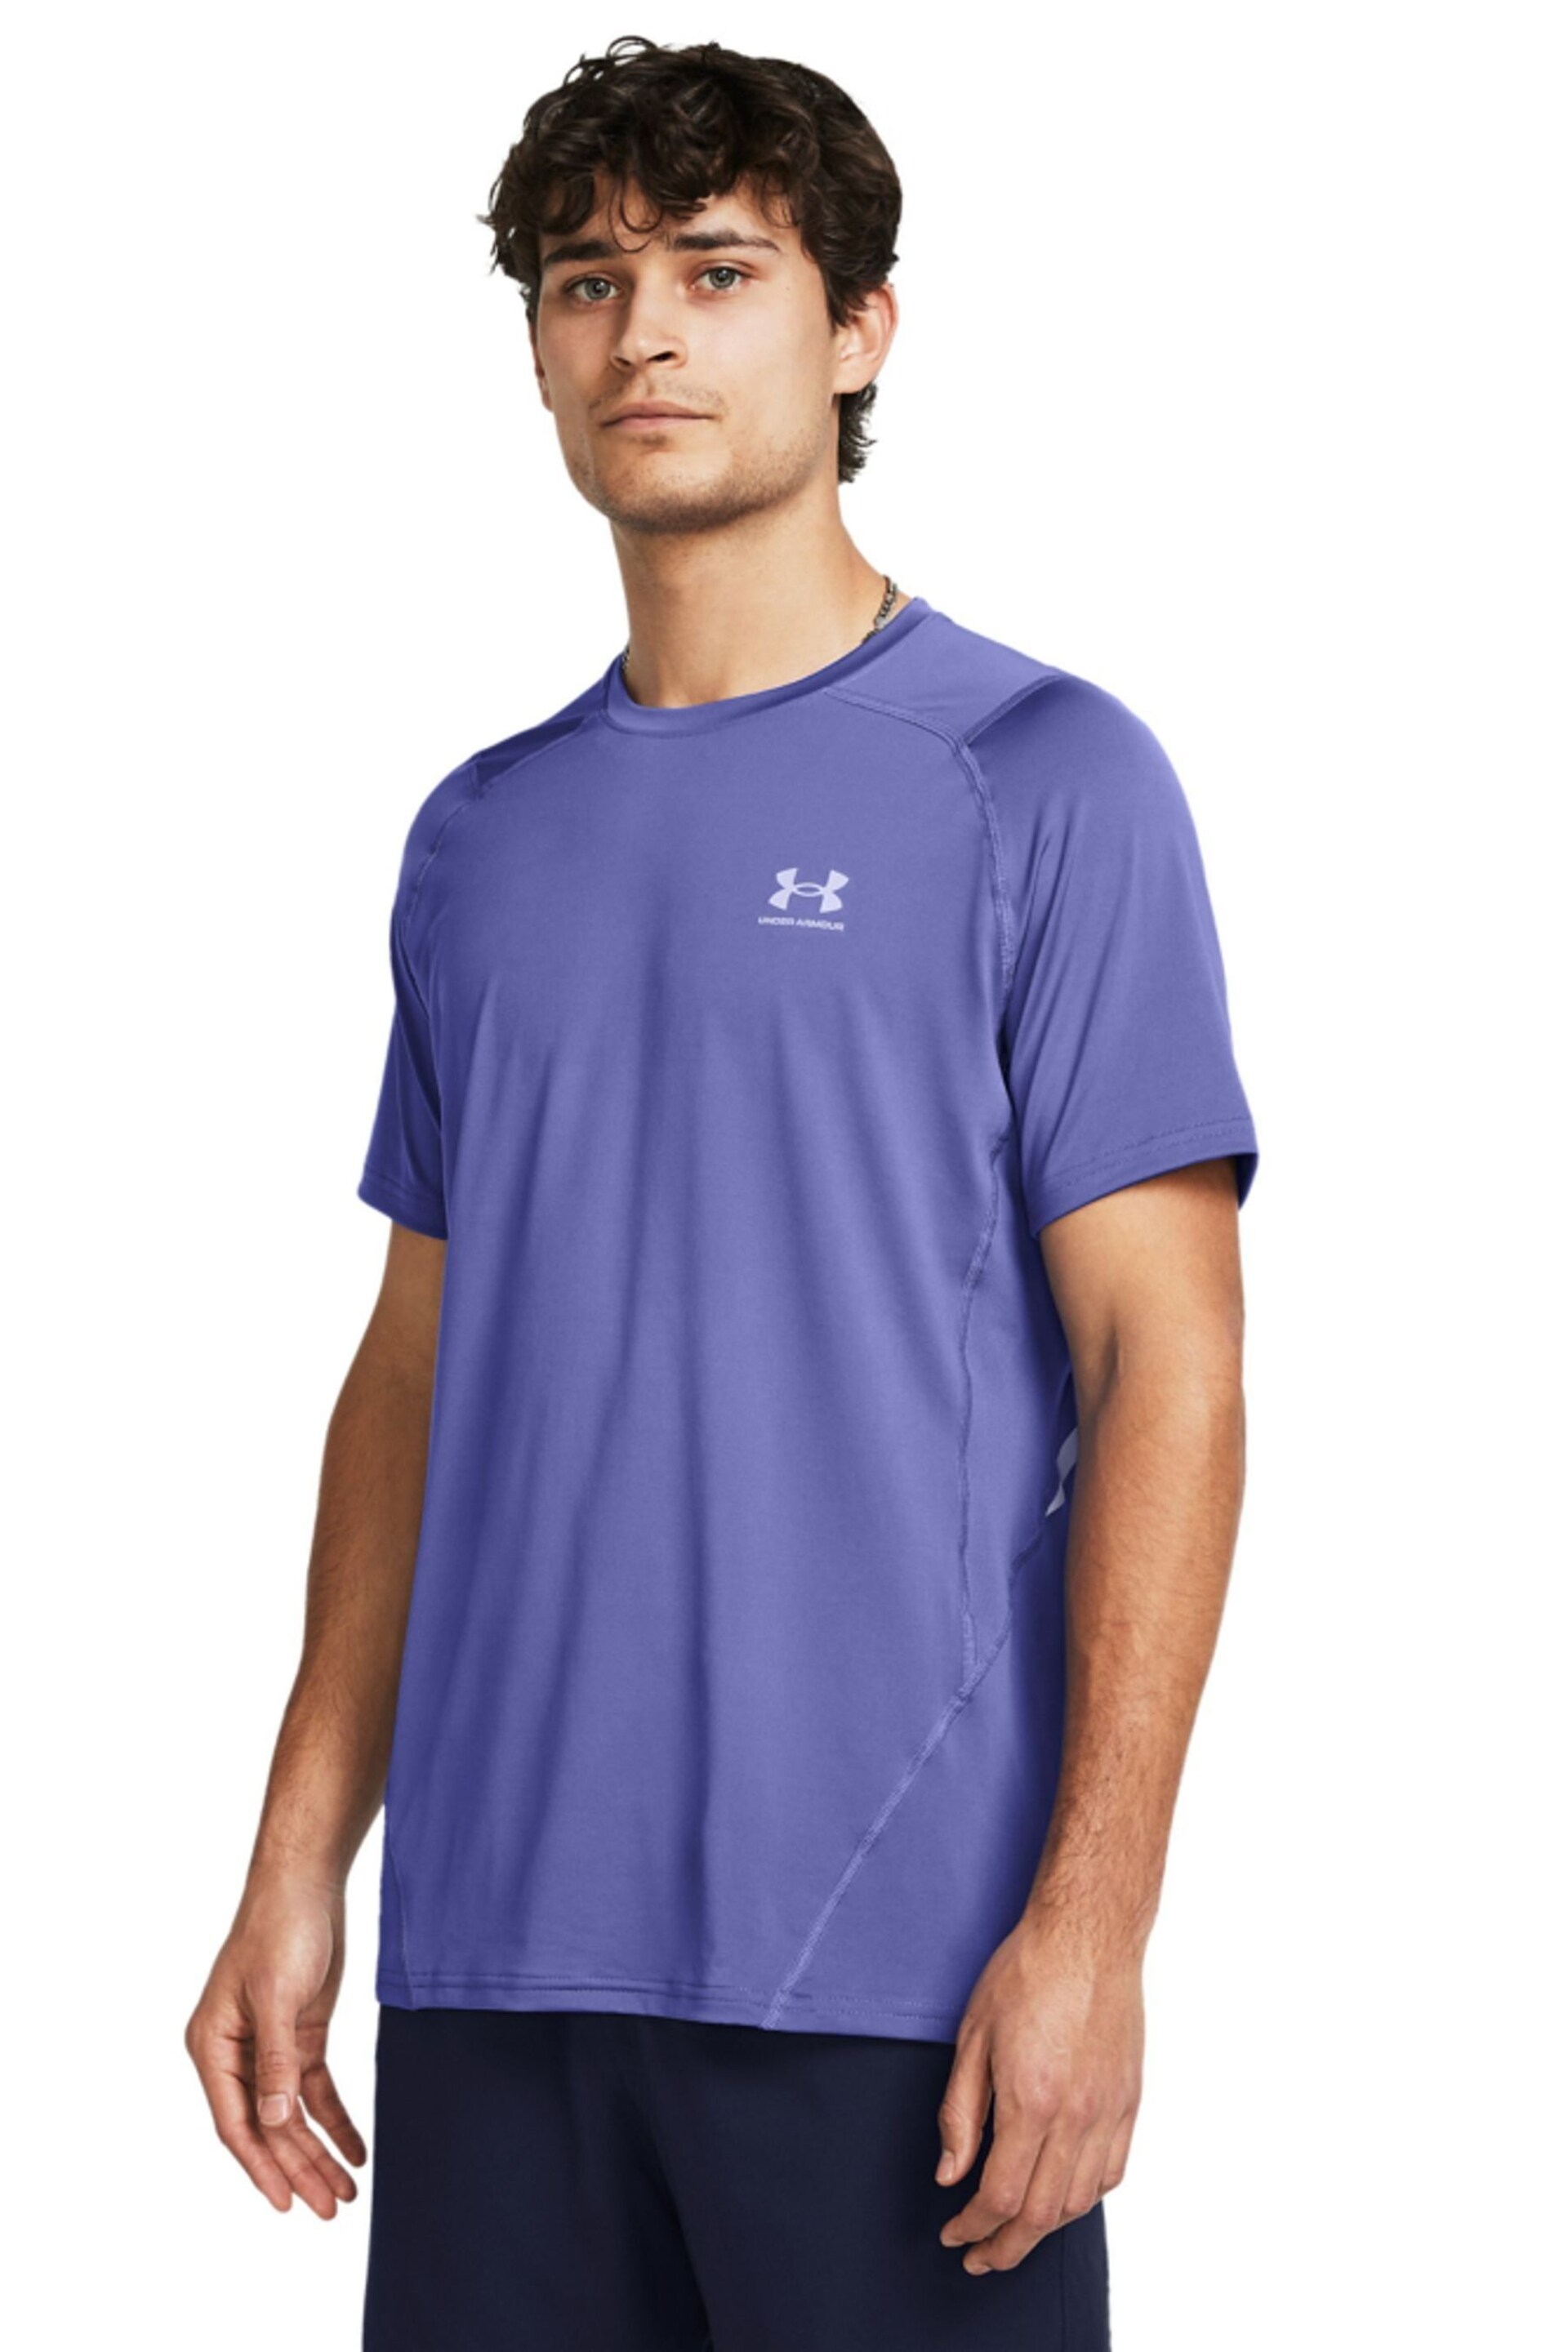 Under Armour Blue HeatGear Fitted Short Sleeve T-Shirt - Image 1 of 2